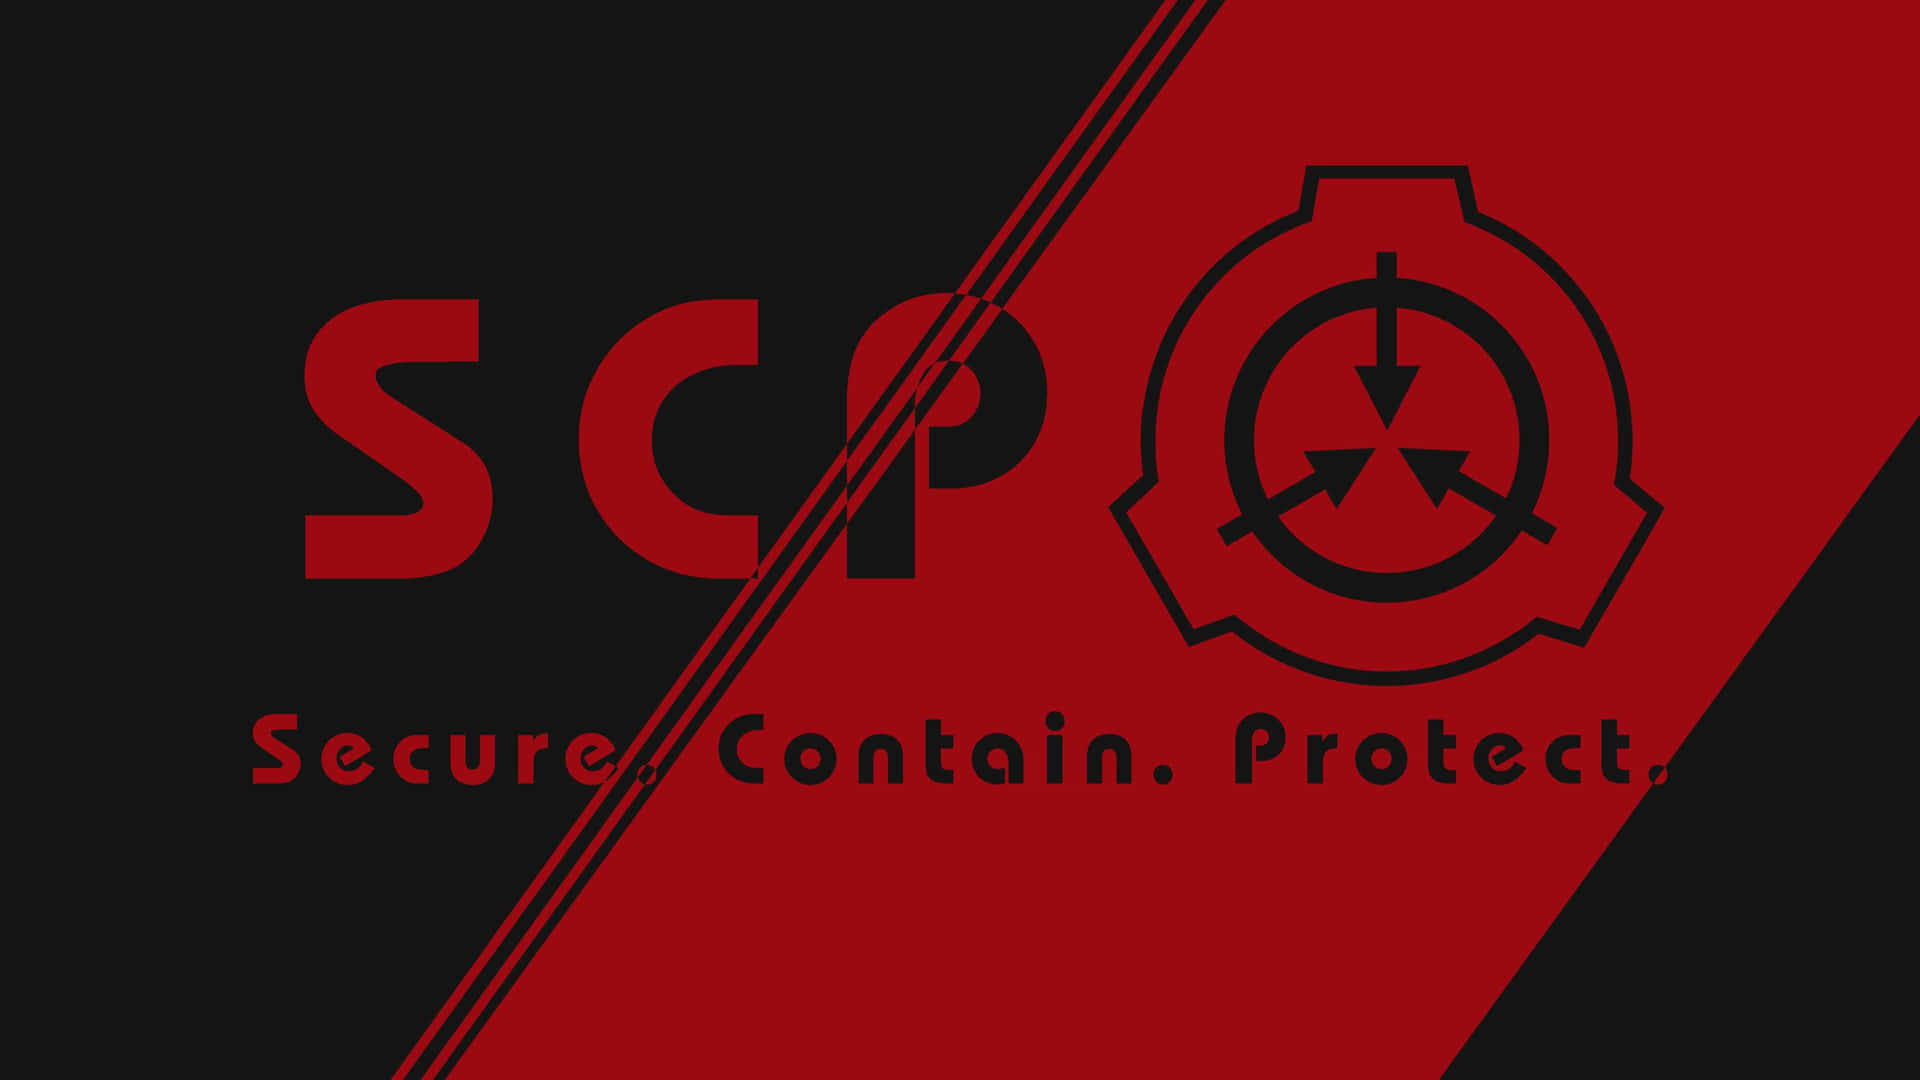 A Mysterious Entity Protects SCP